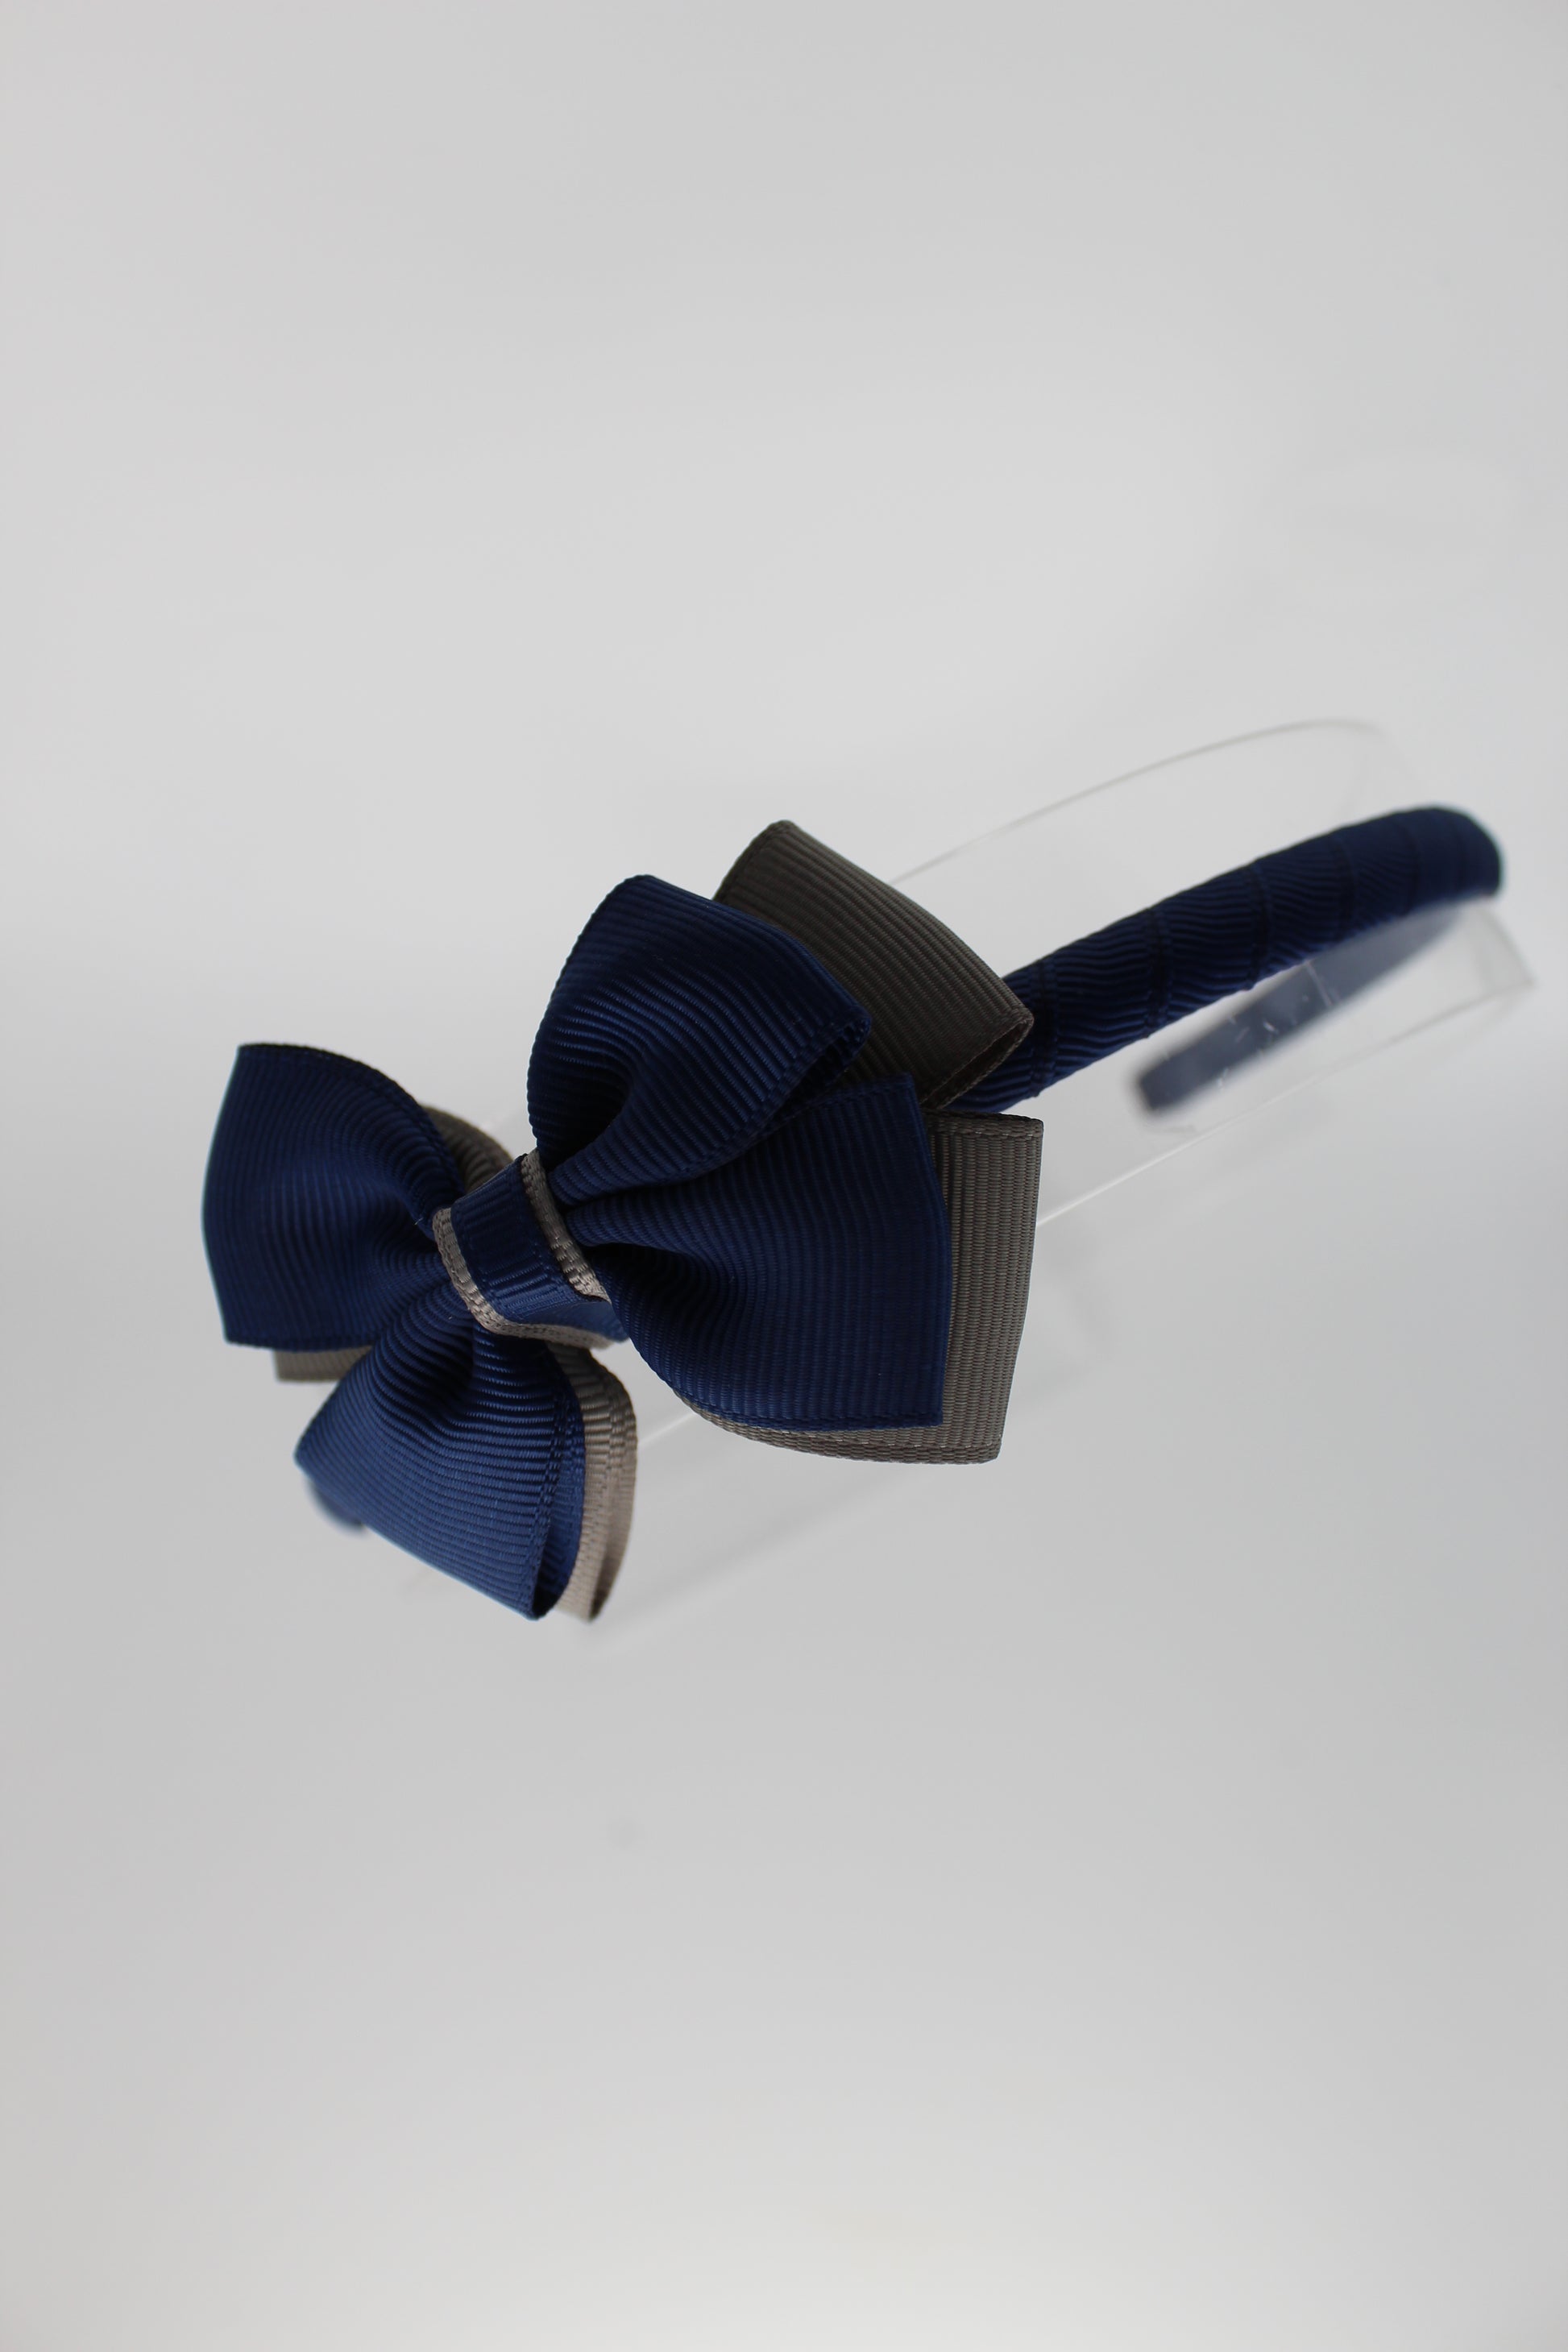 Bow Hairband - Navy Blue and Metal Grey